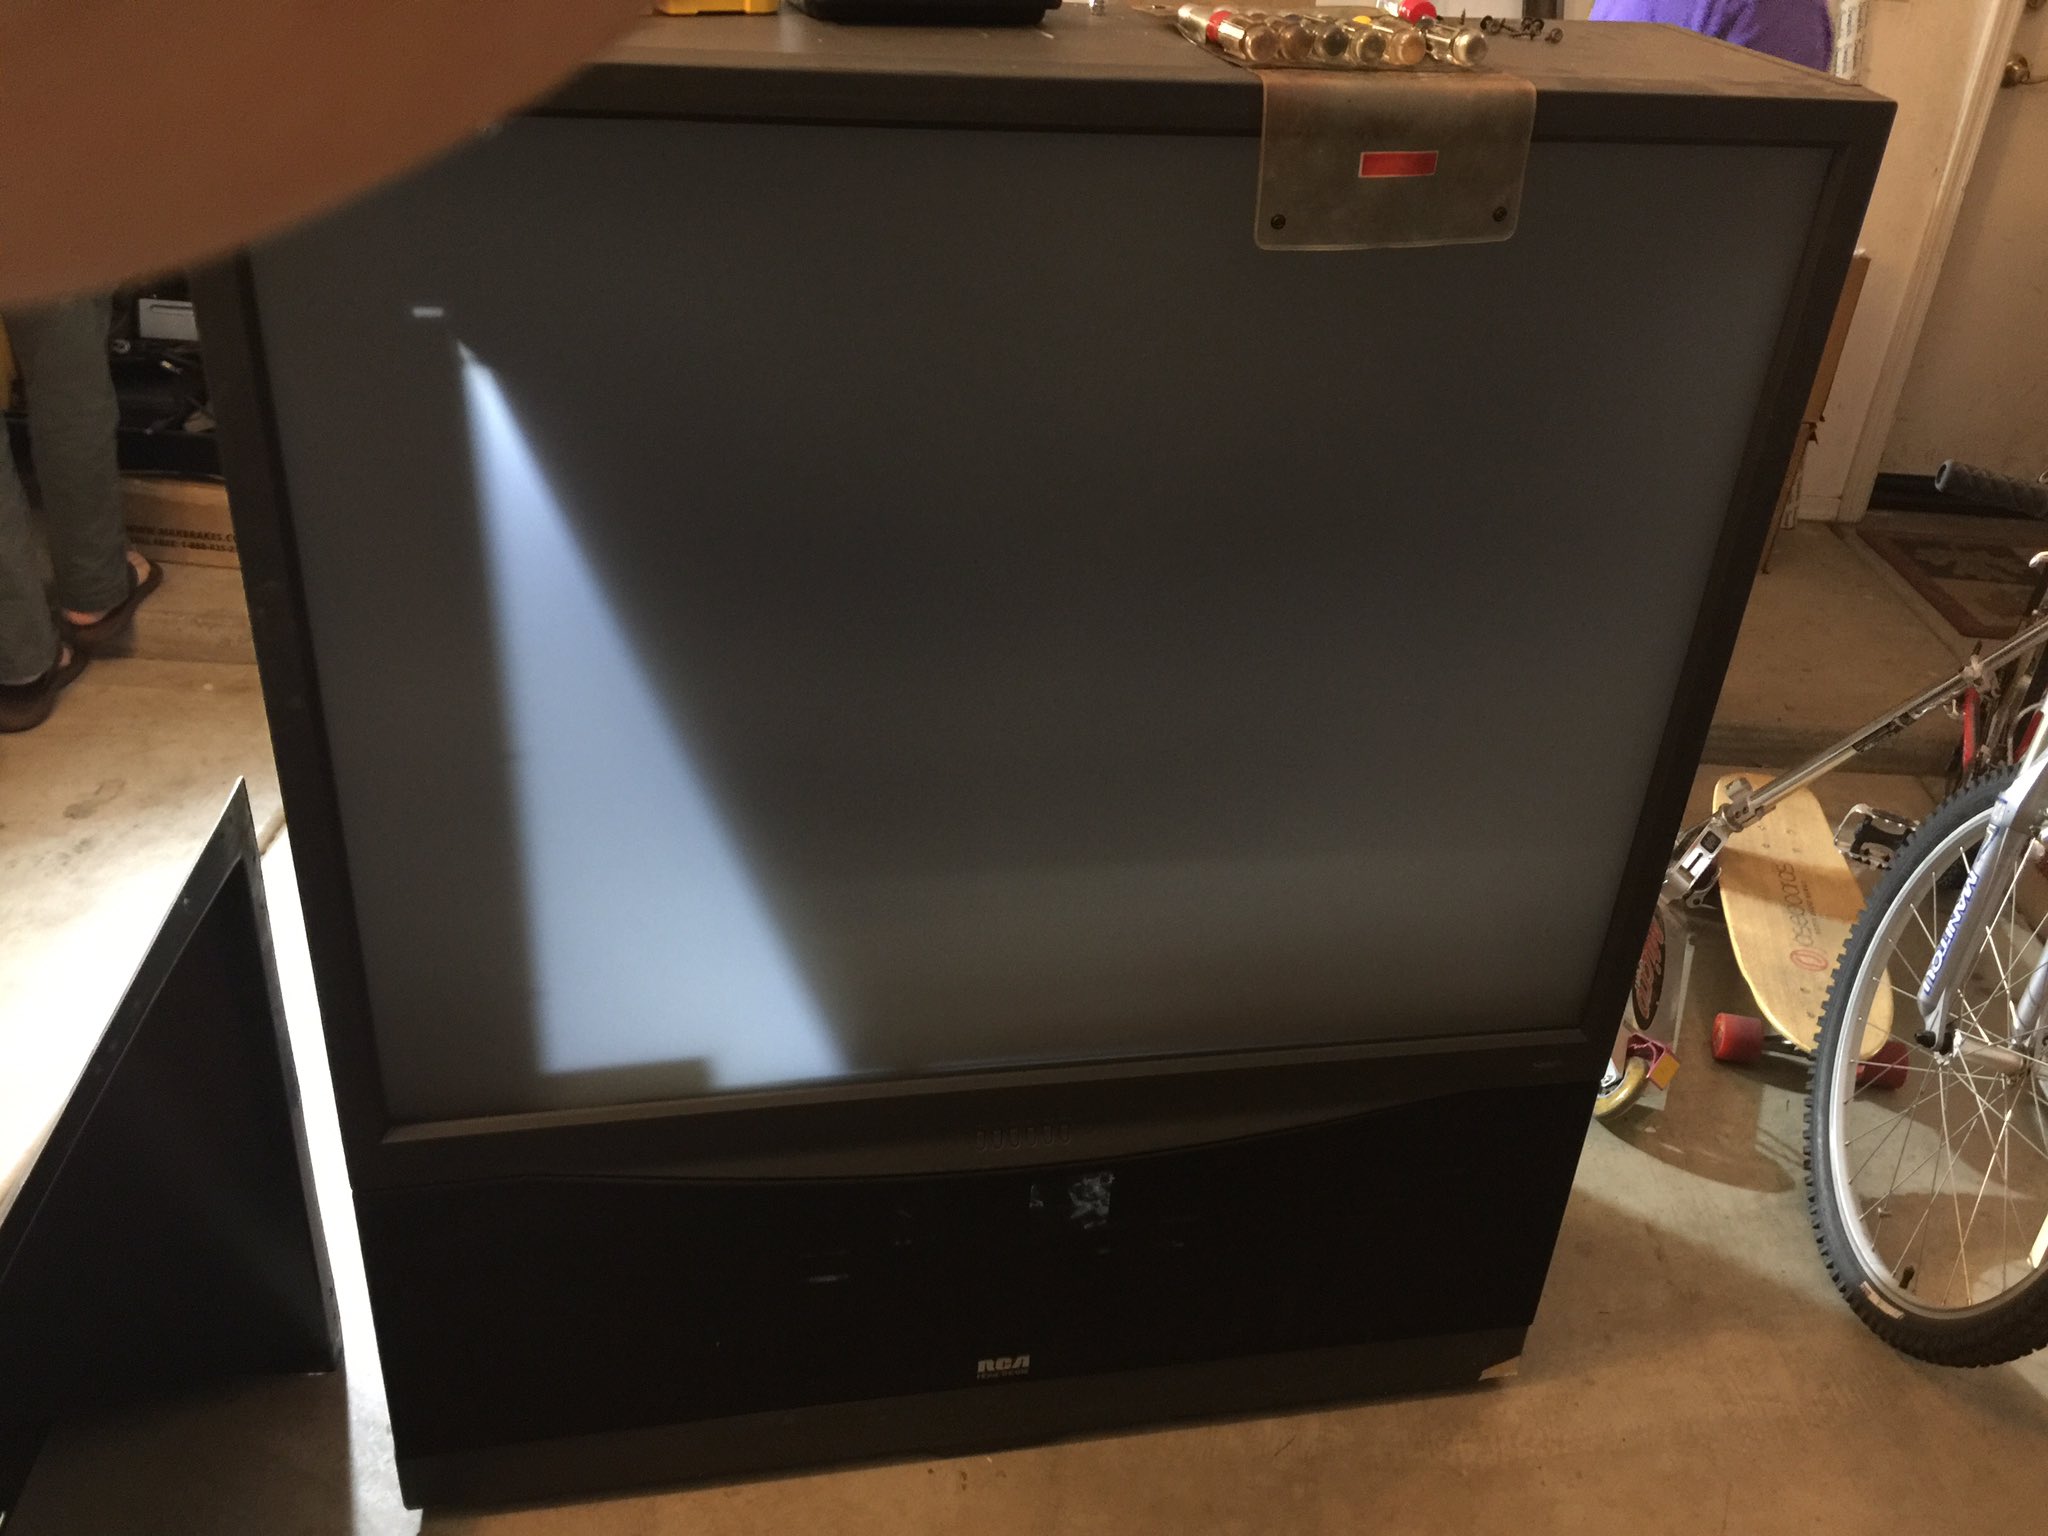 Voorman Millimeter Verbeelding Jim St. Leger on Twitter: "Great Sunday family project: disassembling an  old RCA rear projection TV. Learning how it works; getting Fresnel lens.  #unmake #video https://t.co/r4h6RjL09U" / Twitter